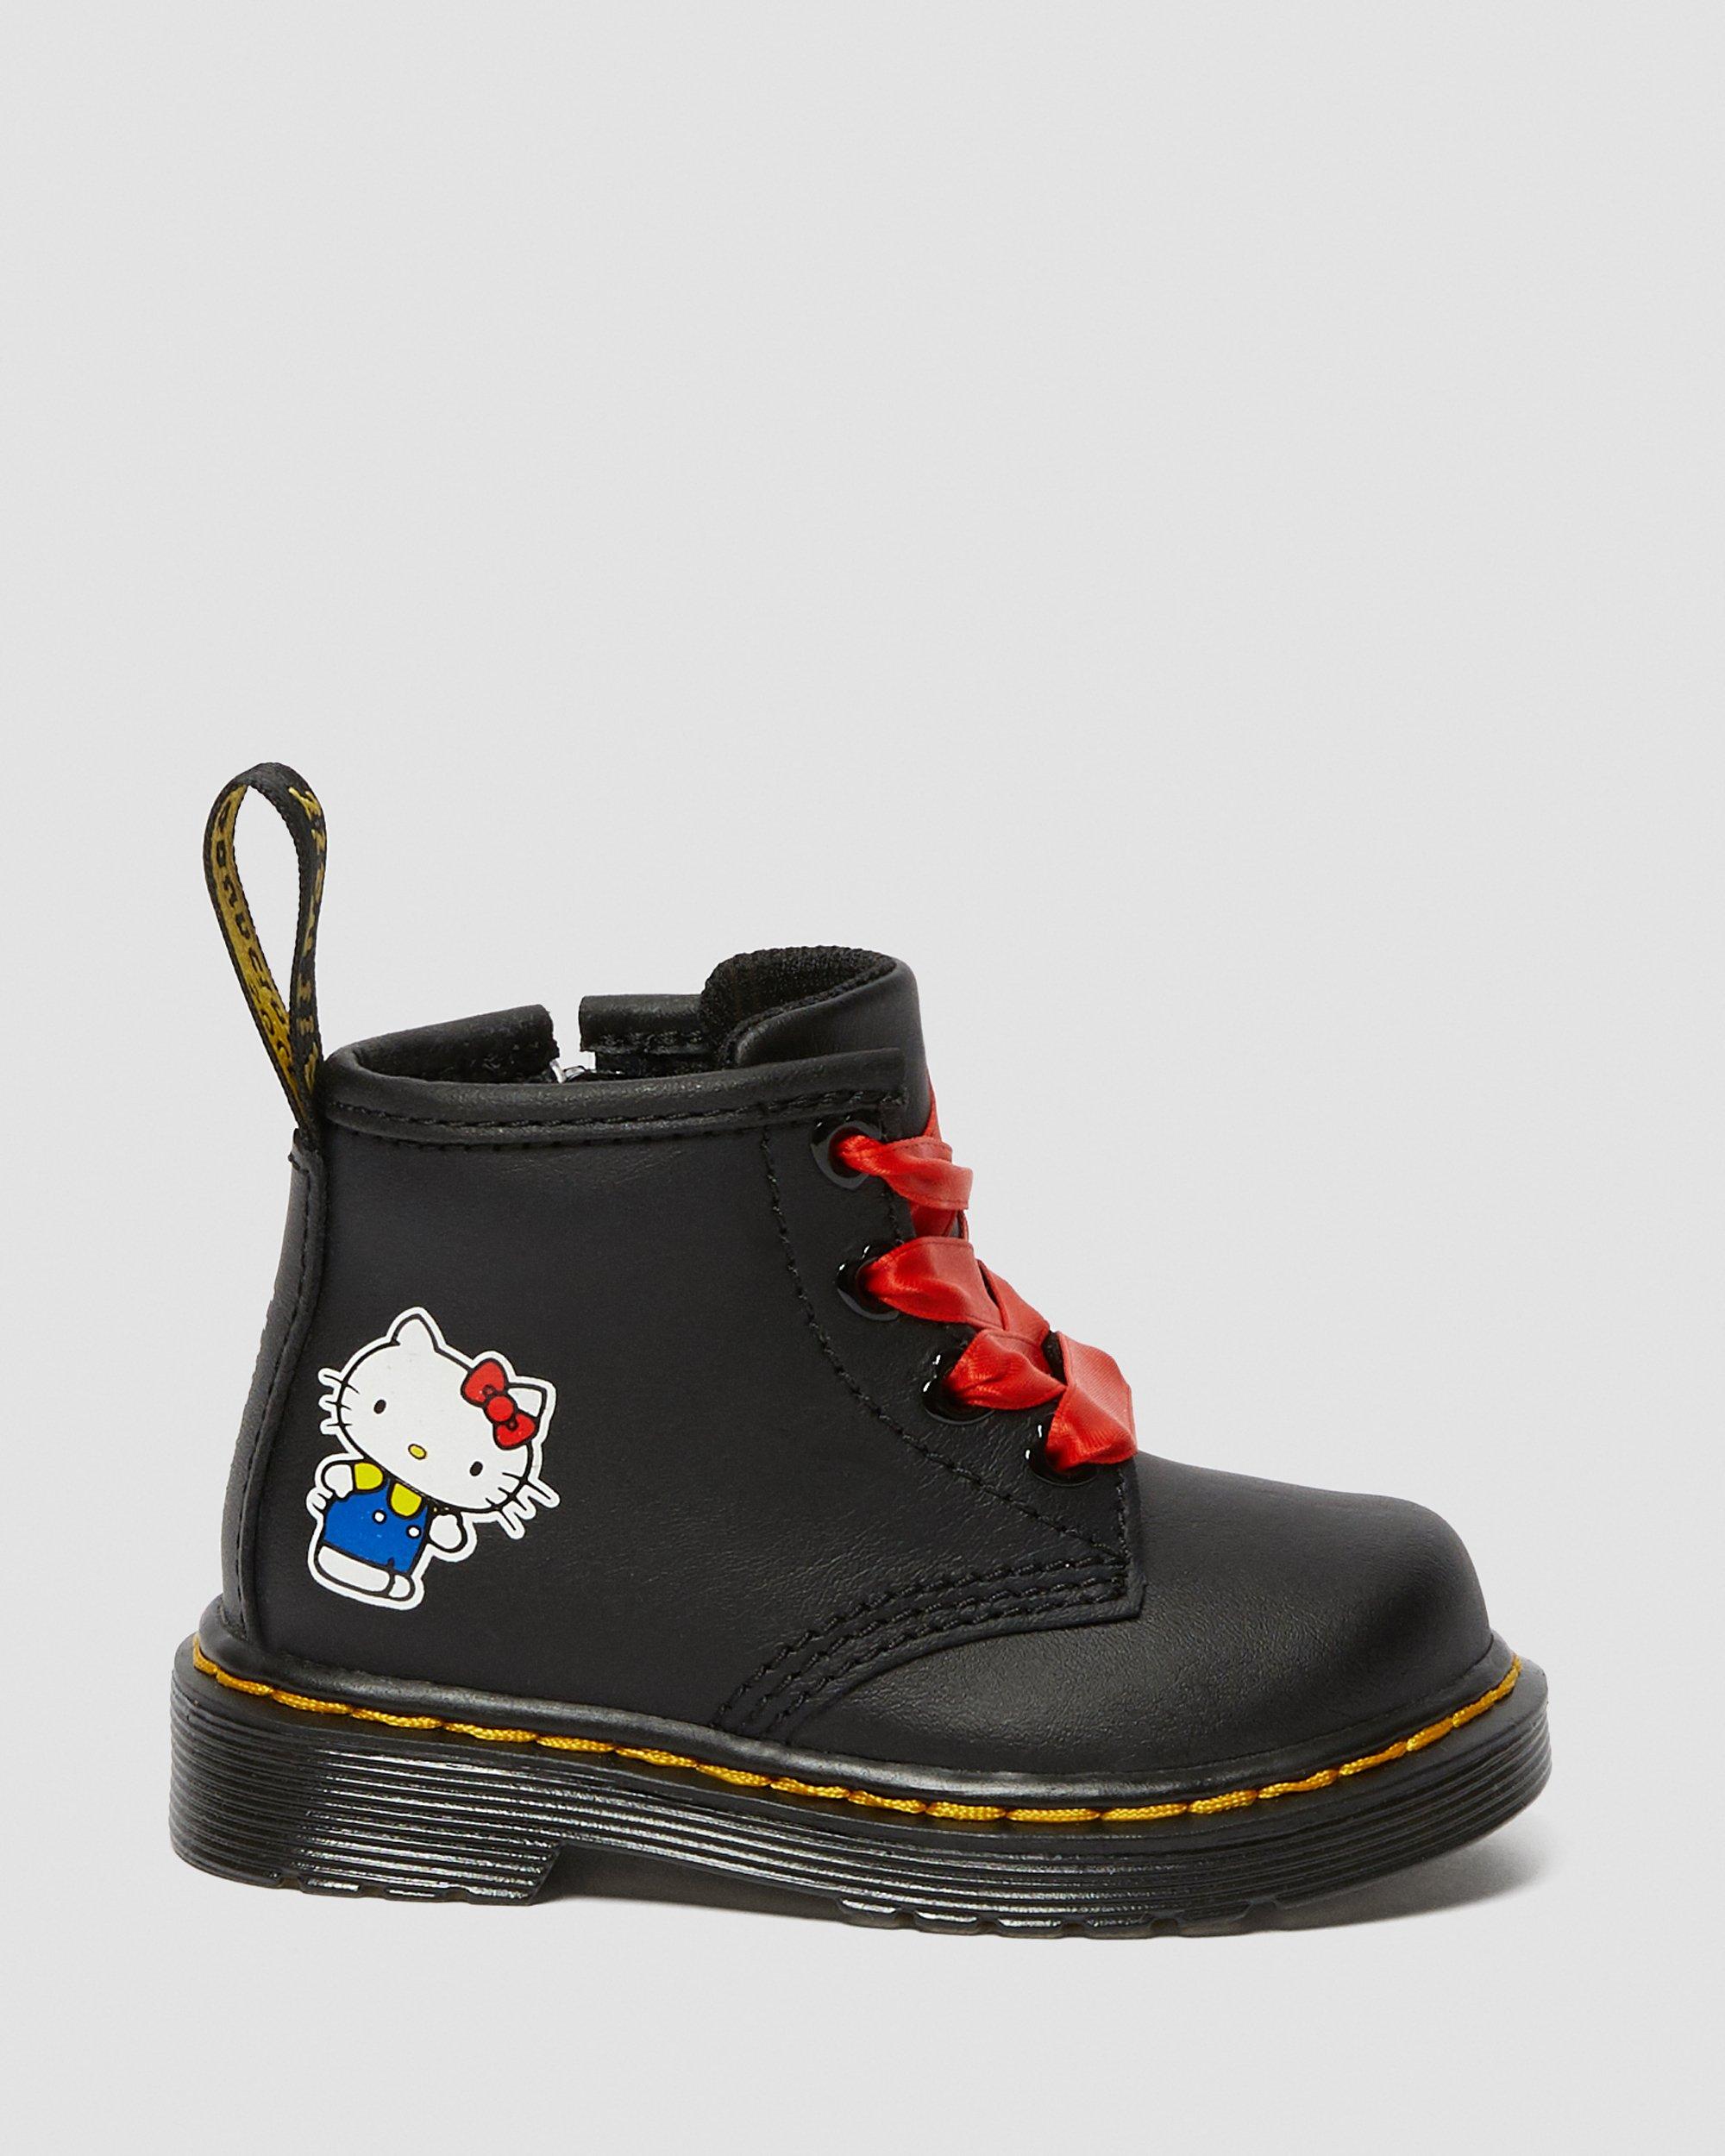 INFANT HELLO KITTY 1460 LEATHER ANKLE BOOTS Dr. Martens